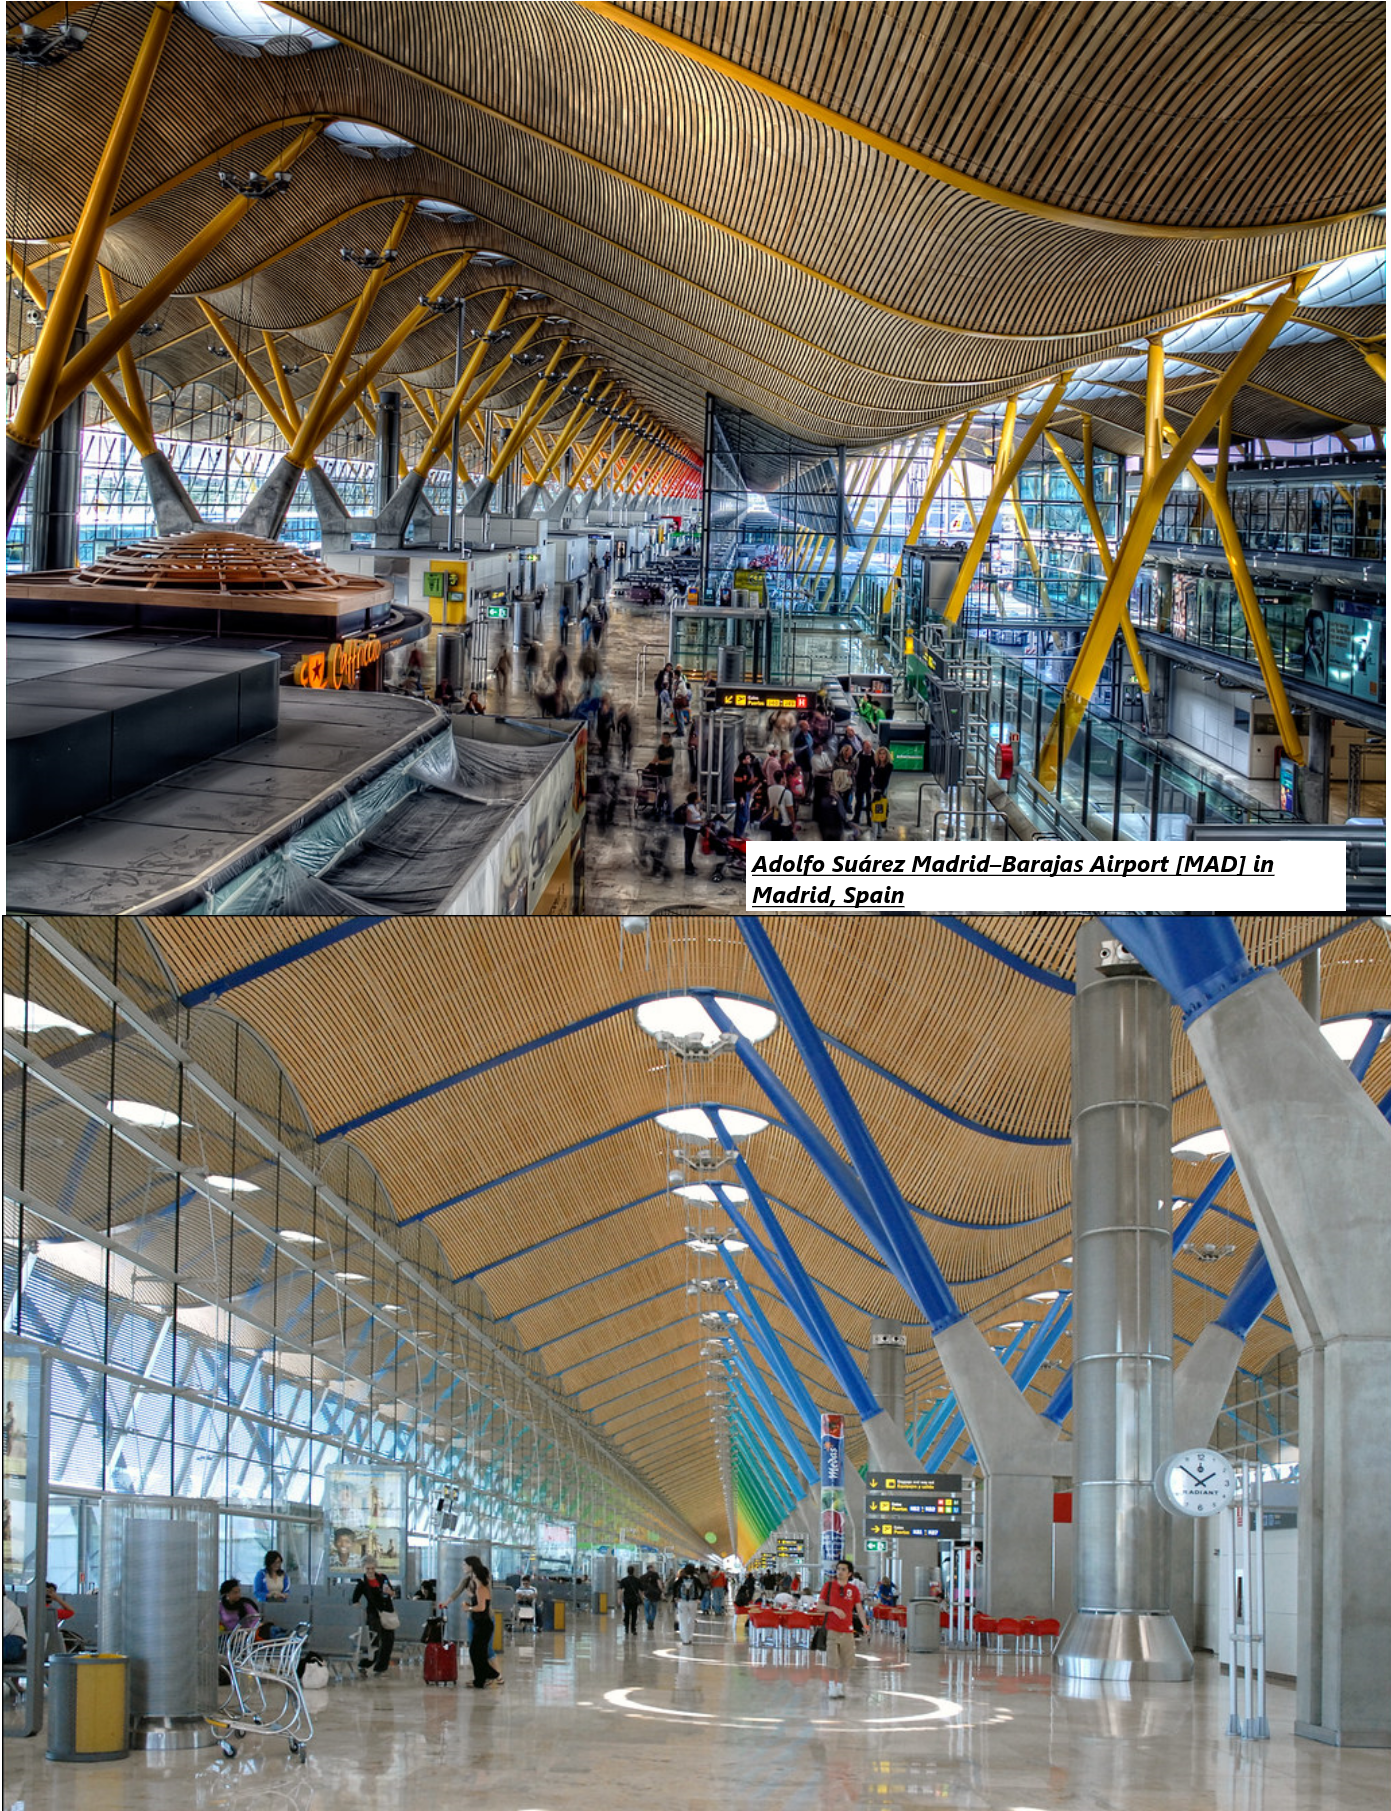 25 most beautiful airports in the world Today